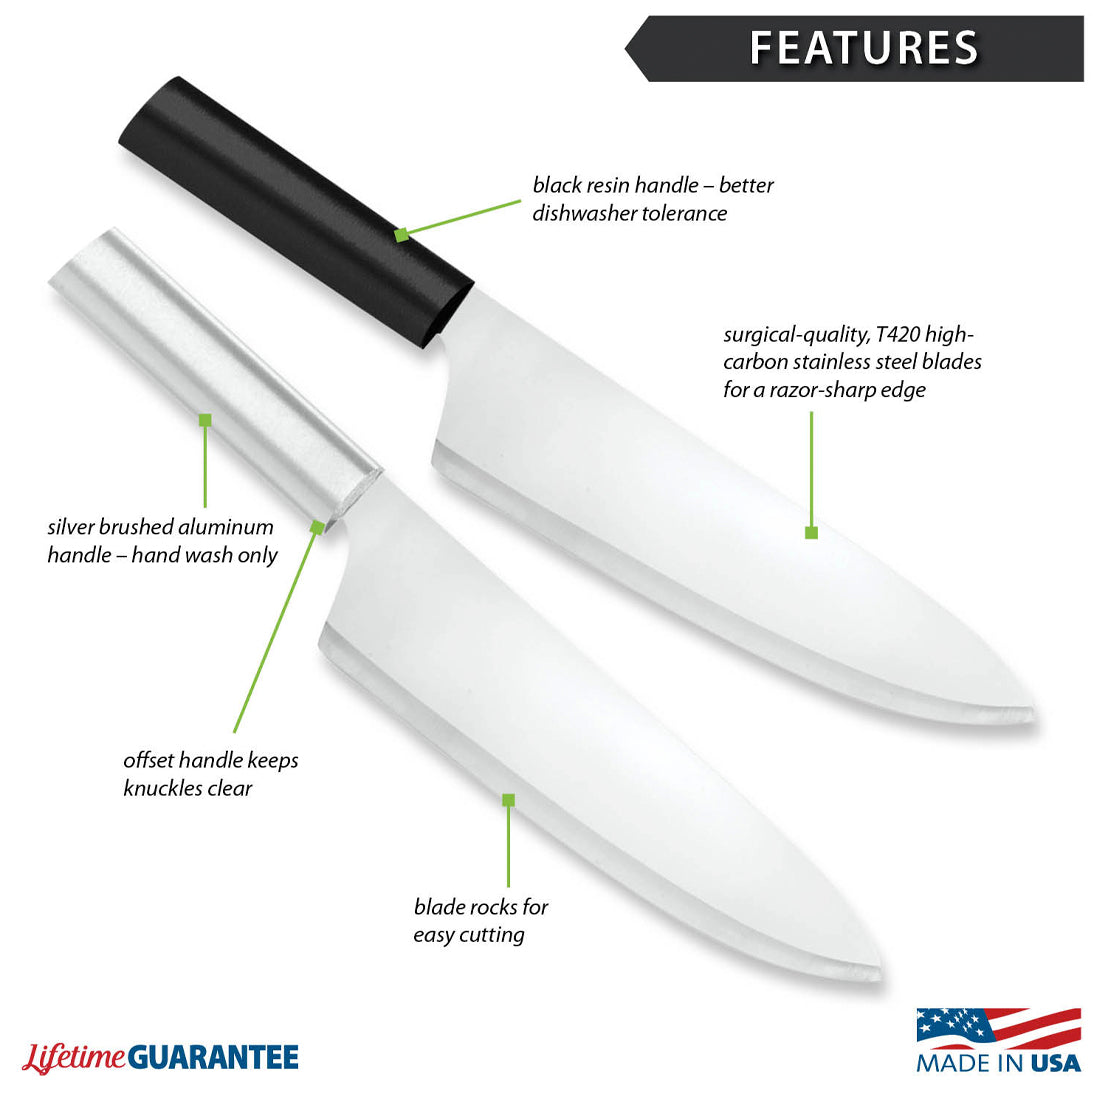 French Chef Knife  Classic French Chef Style - Rada Cutlery